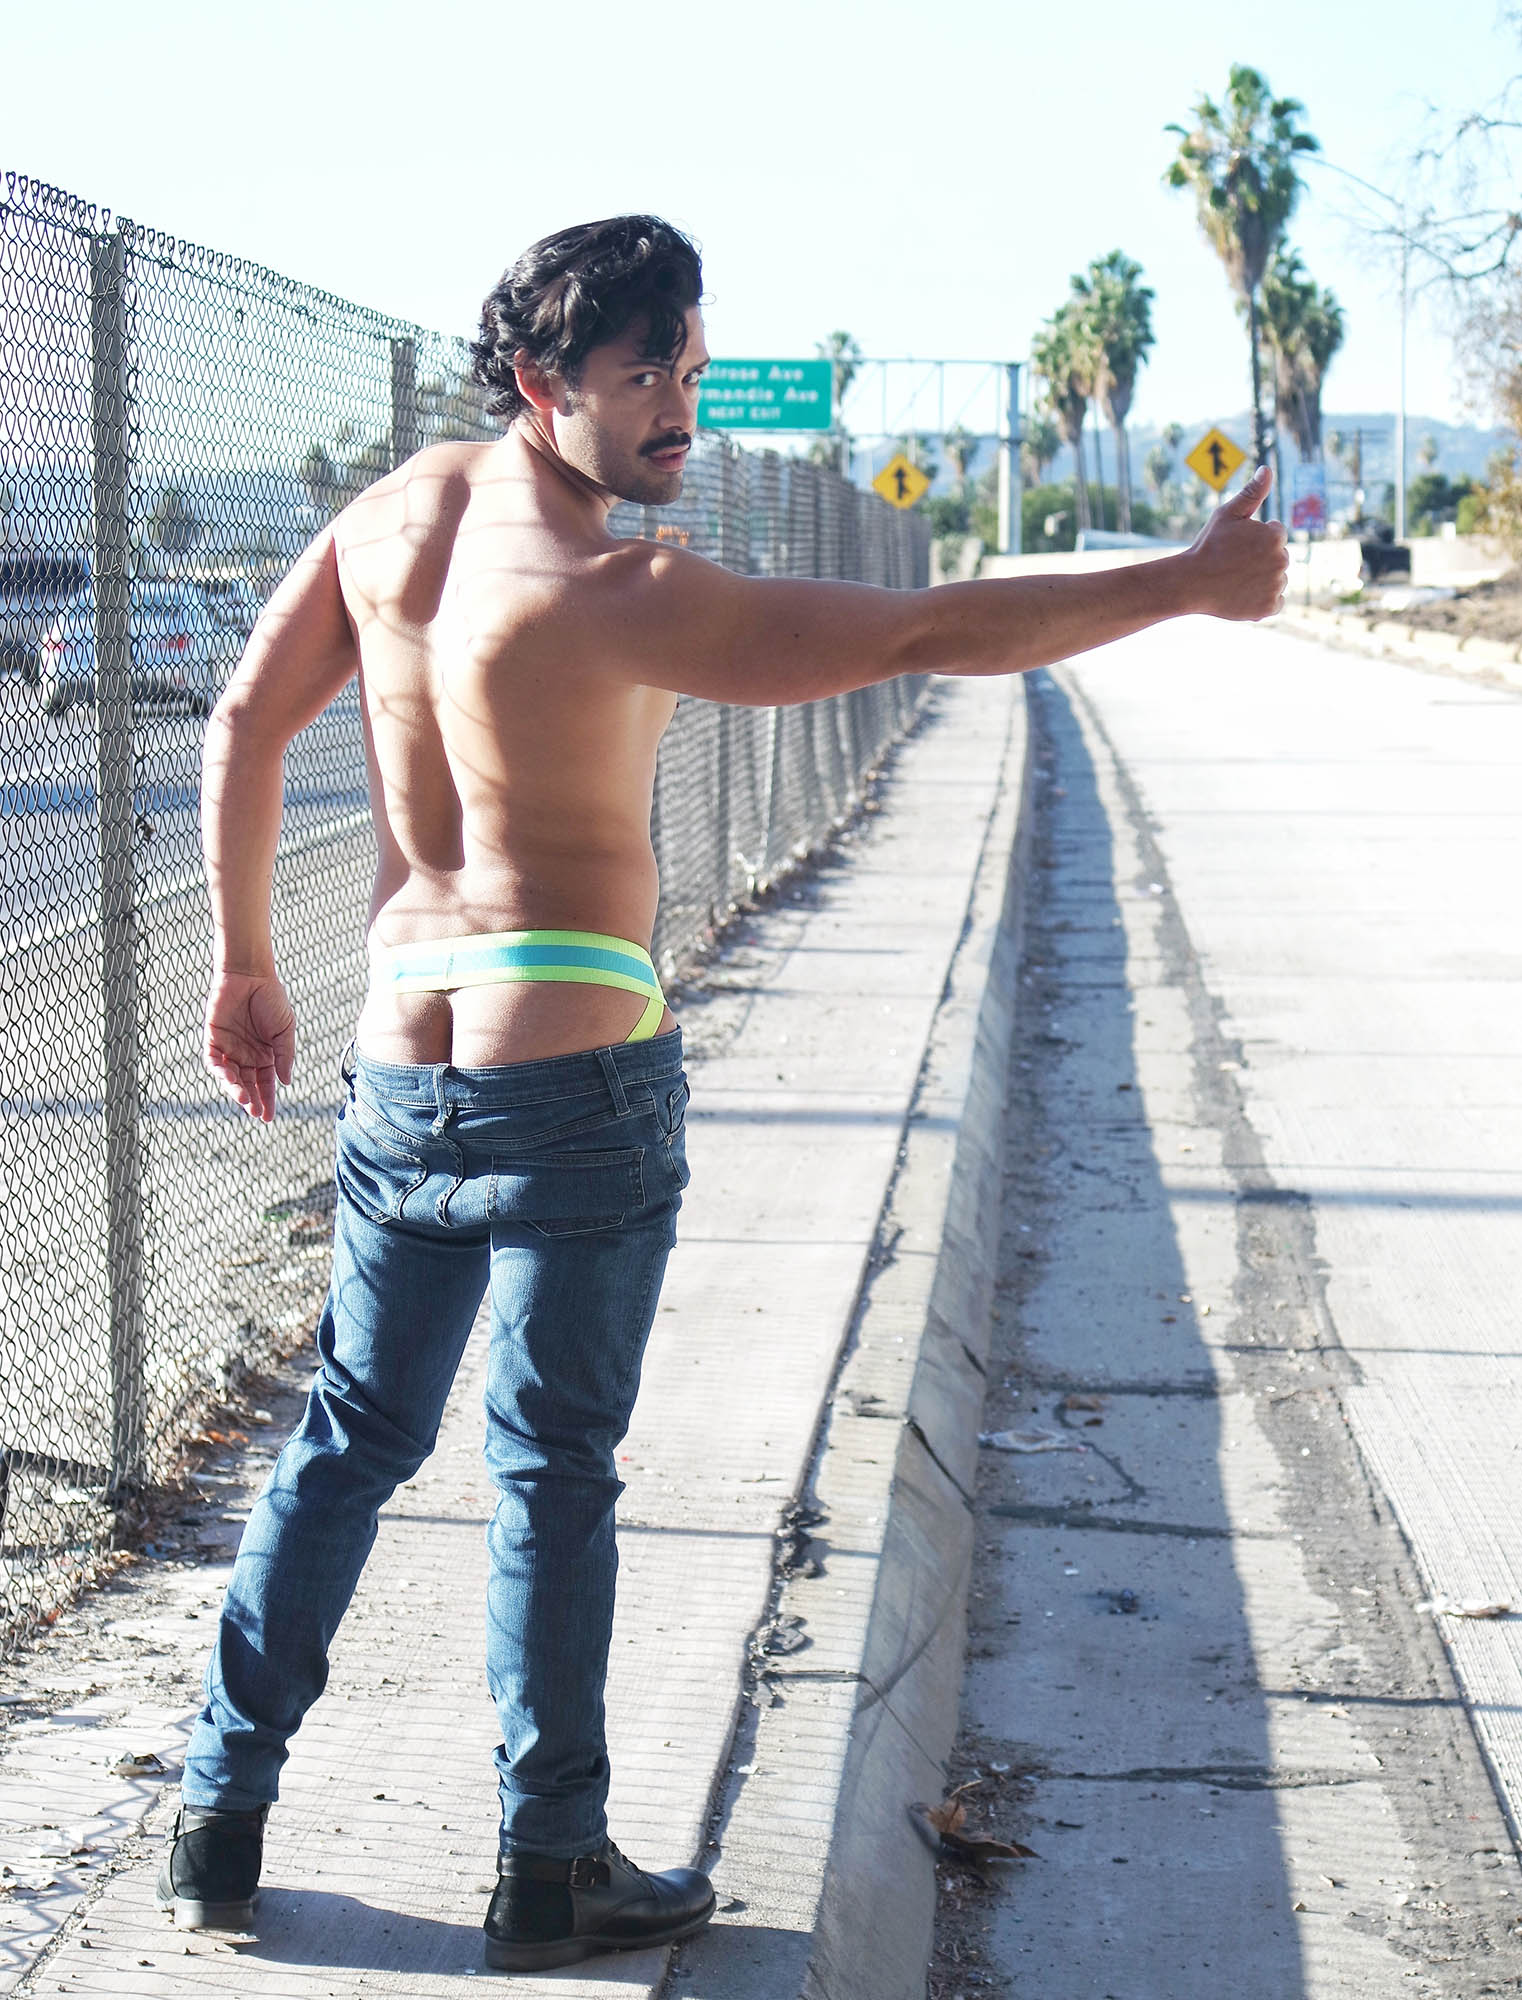 – EXPLICIT CONTENT – «LEO, THE HITCHHIKER –  PART 1» – Leo by Ryan Stanford.